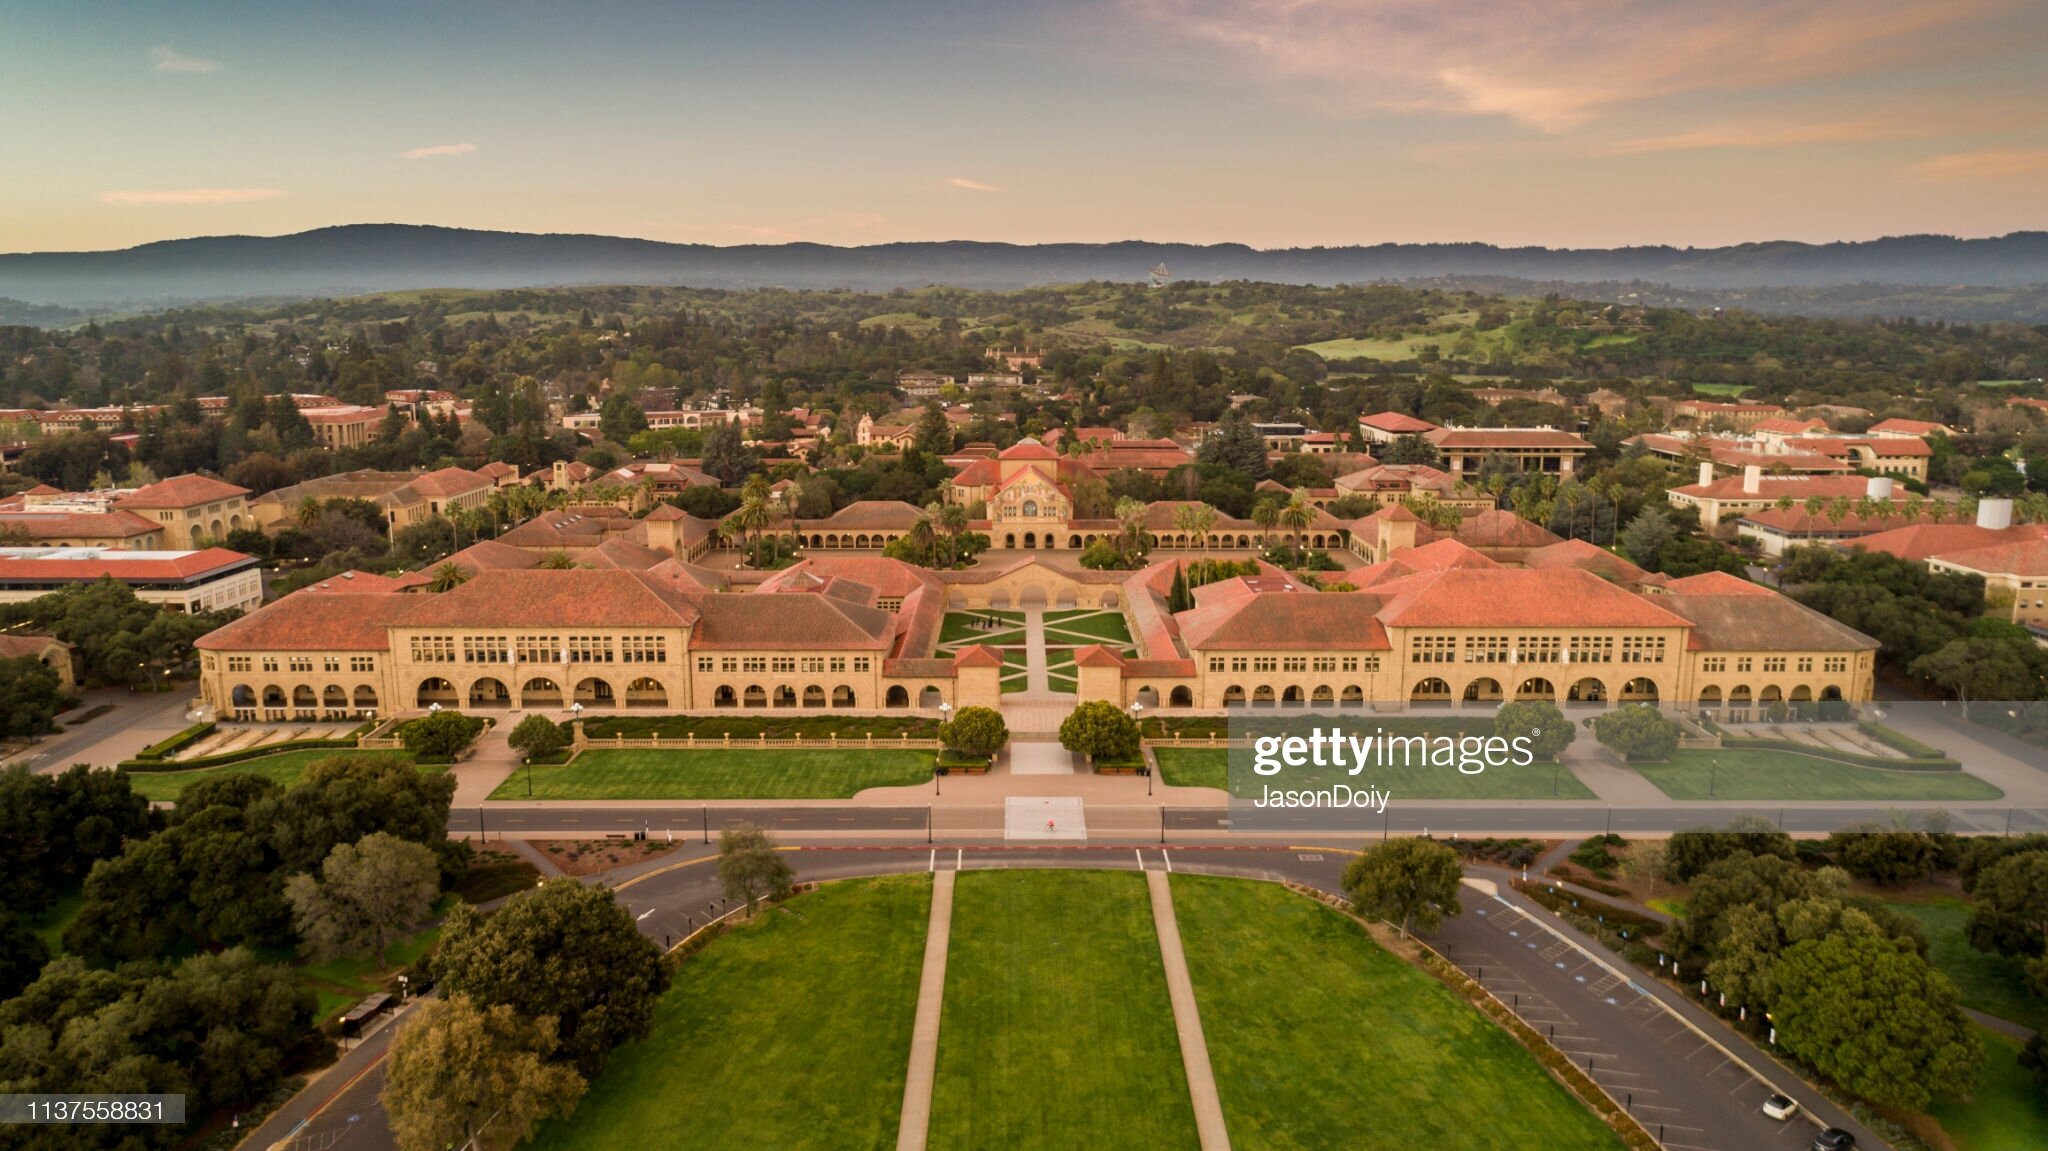 Picture of Stanford University’s campus taken by JasonDoiy - Getty Images